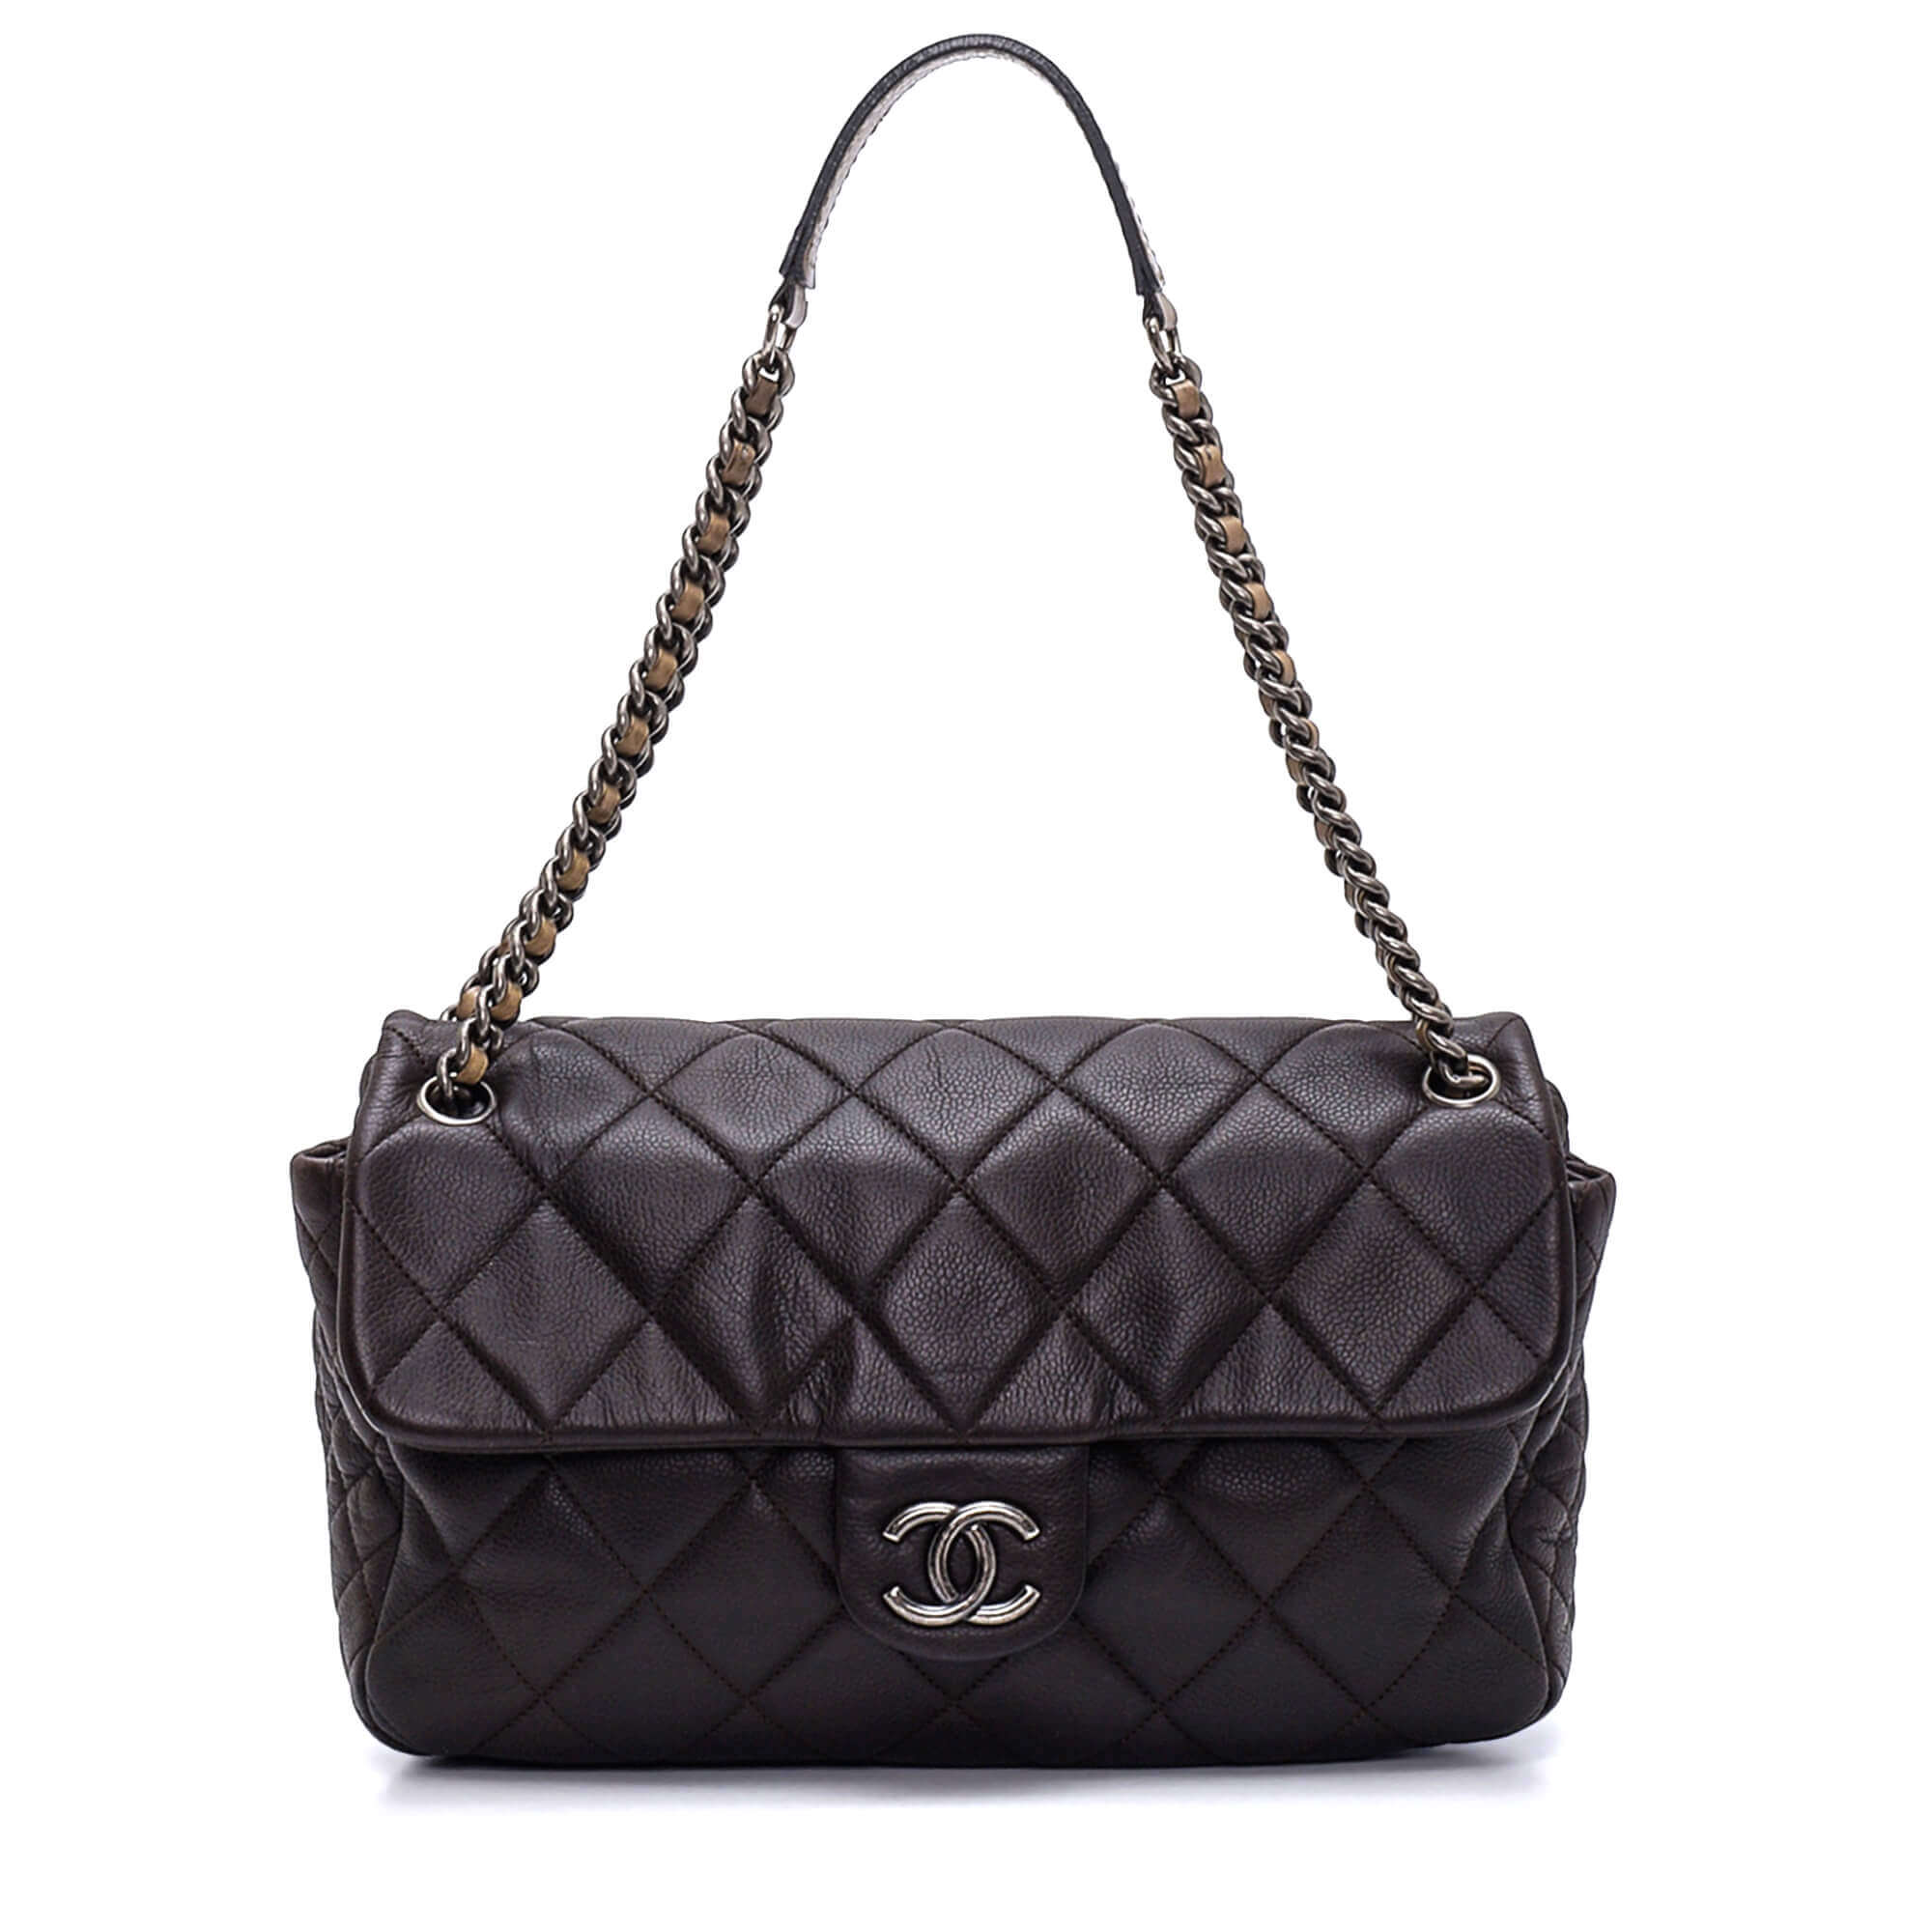 Chanel - Dark Brown Quilted Caviar Leather Flap Bag